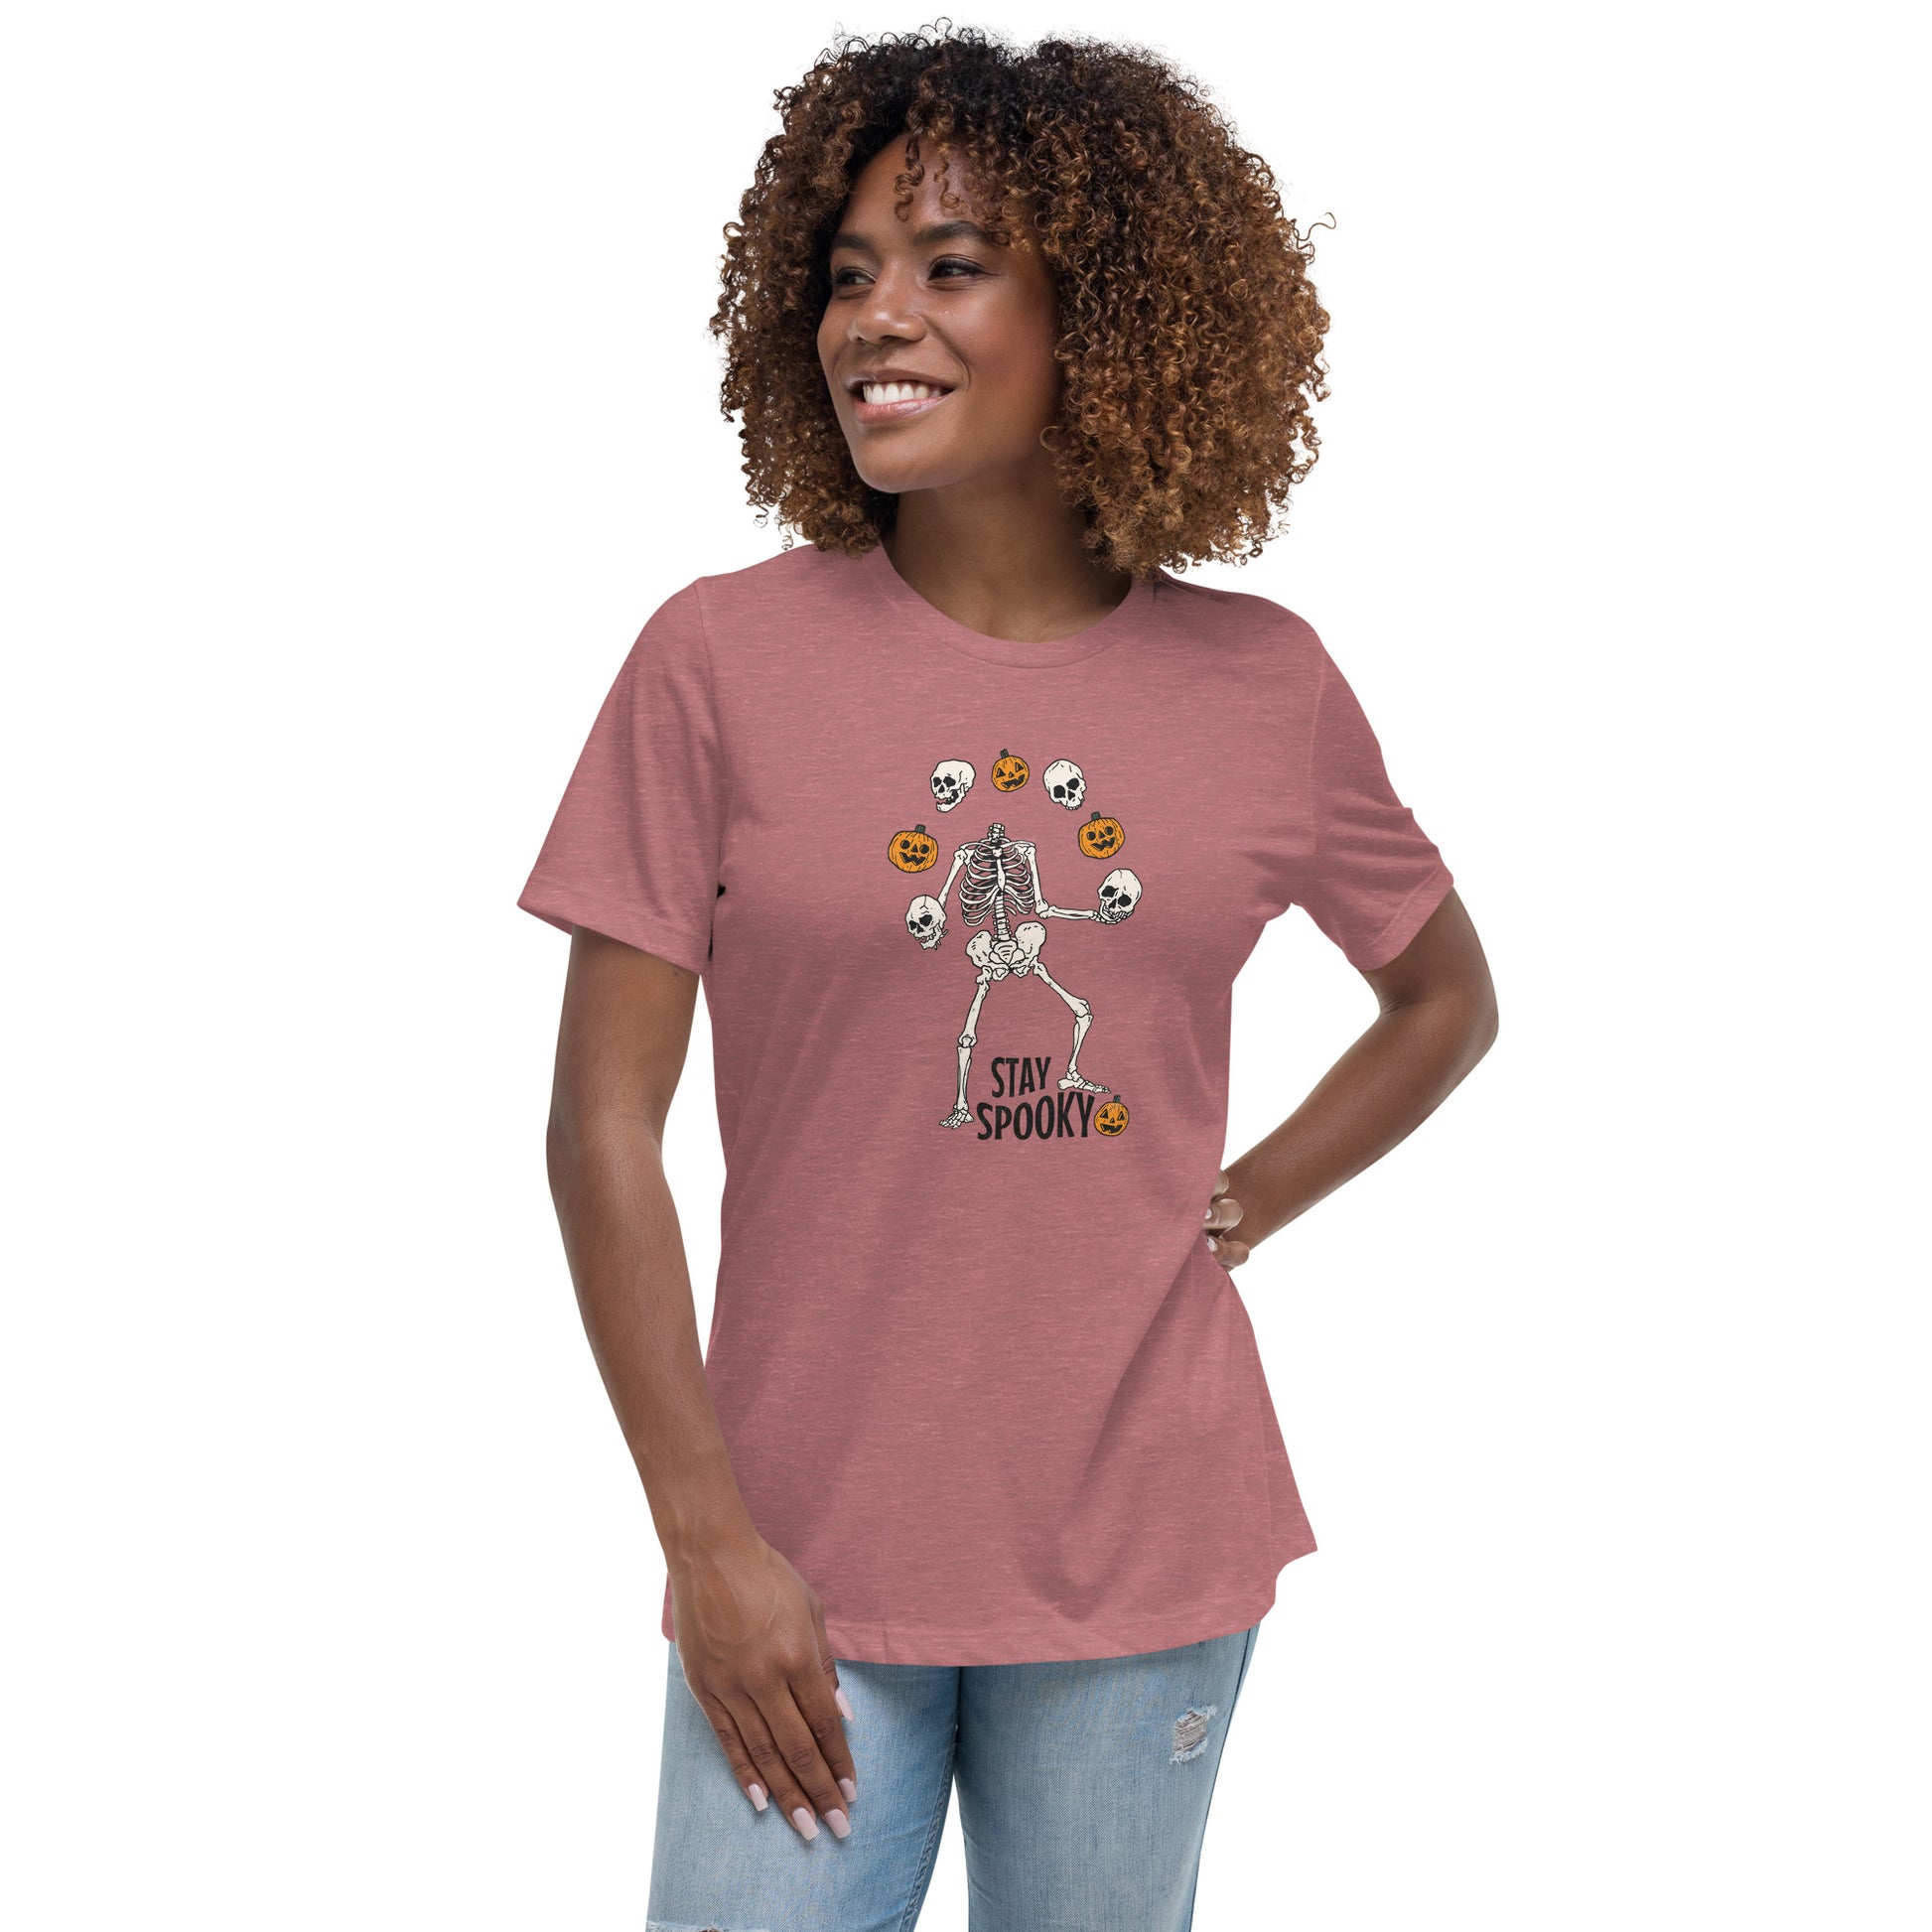 Stay Spooky Women's Relaxed T-Shirt Tee Tshirt